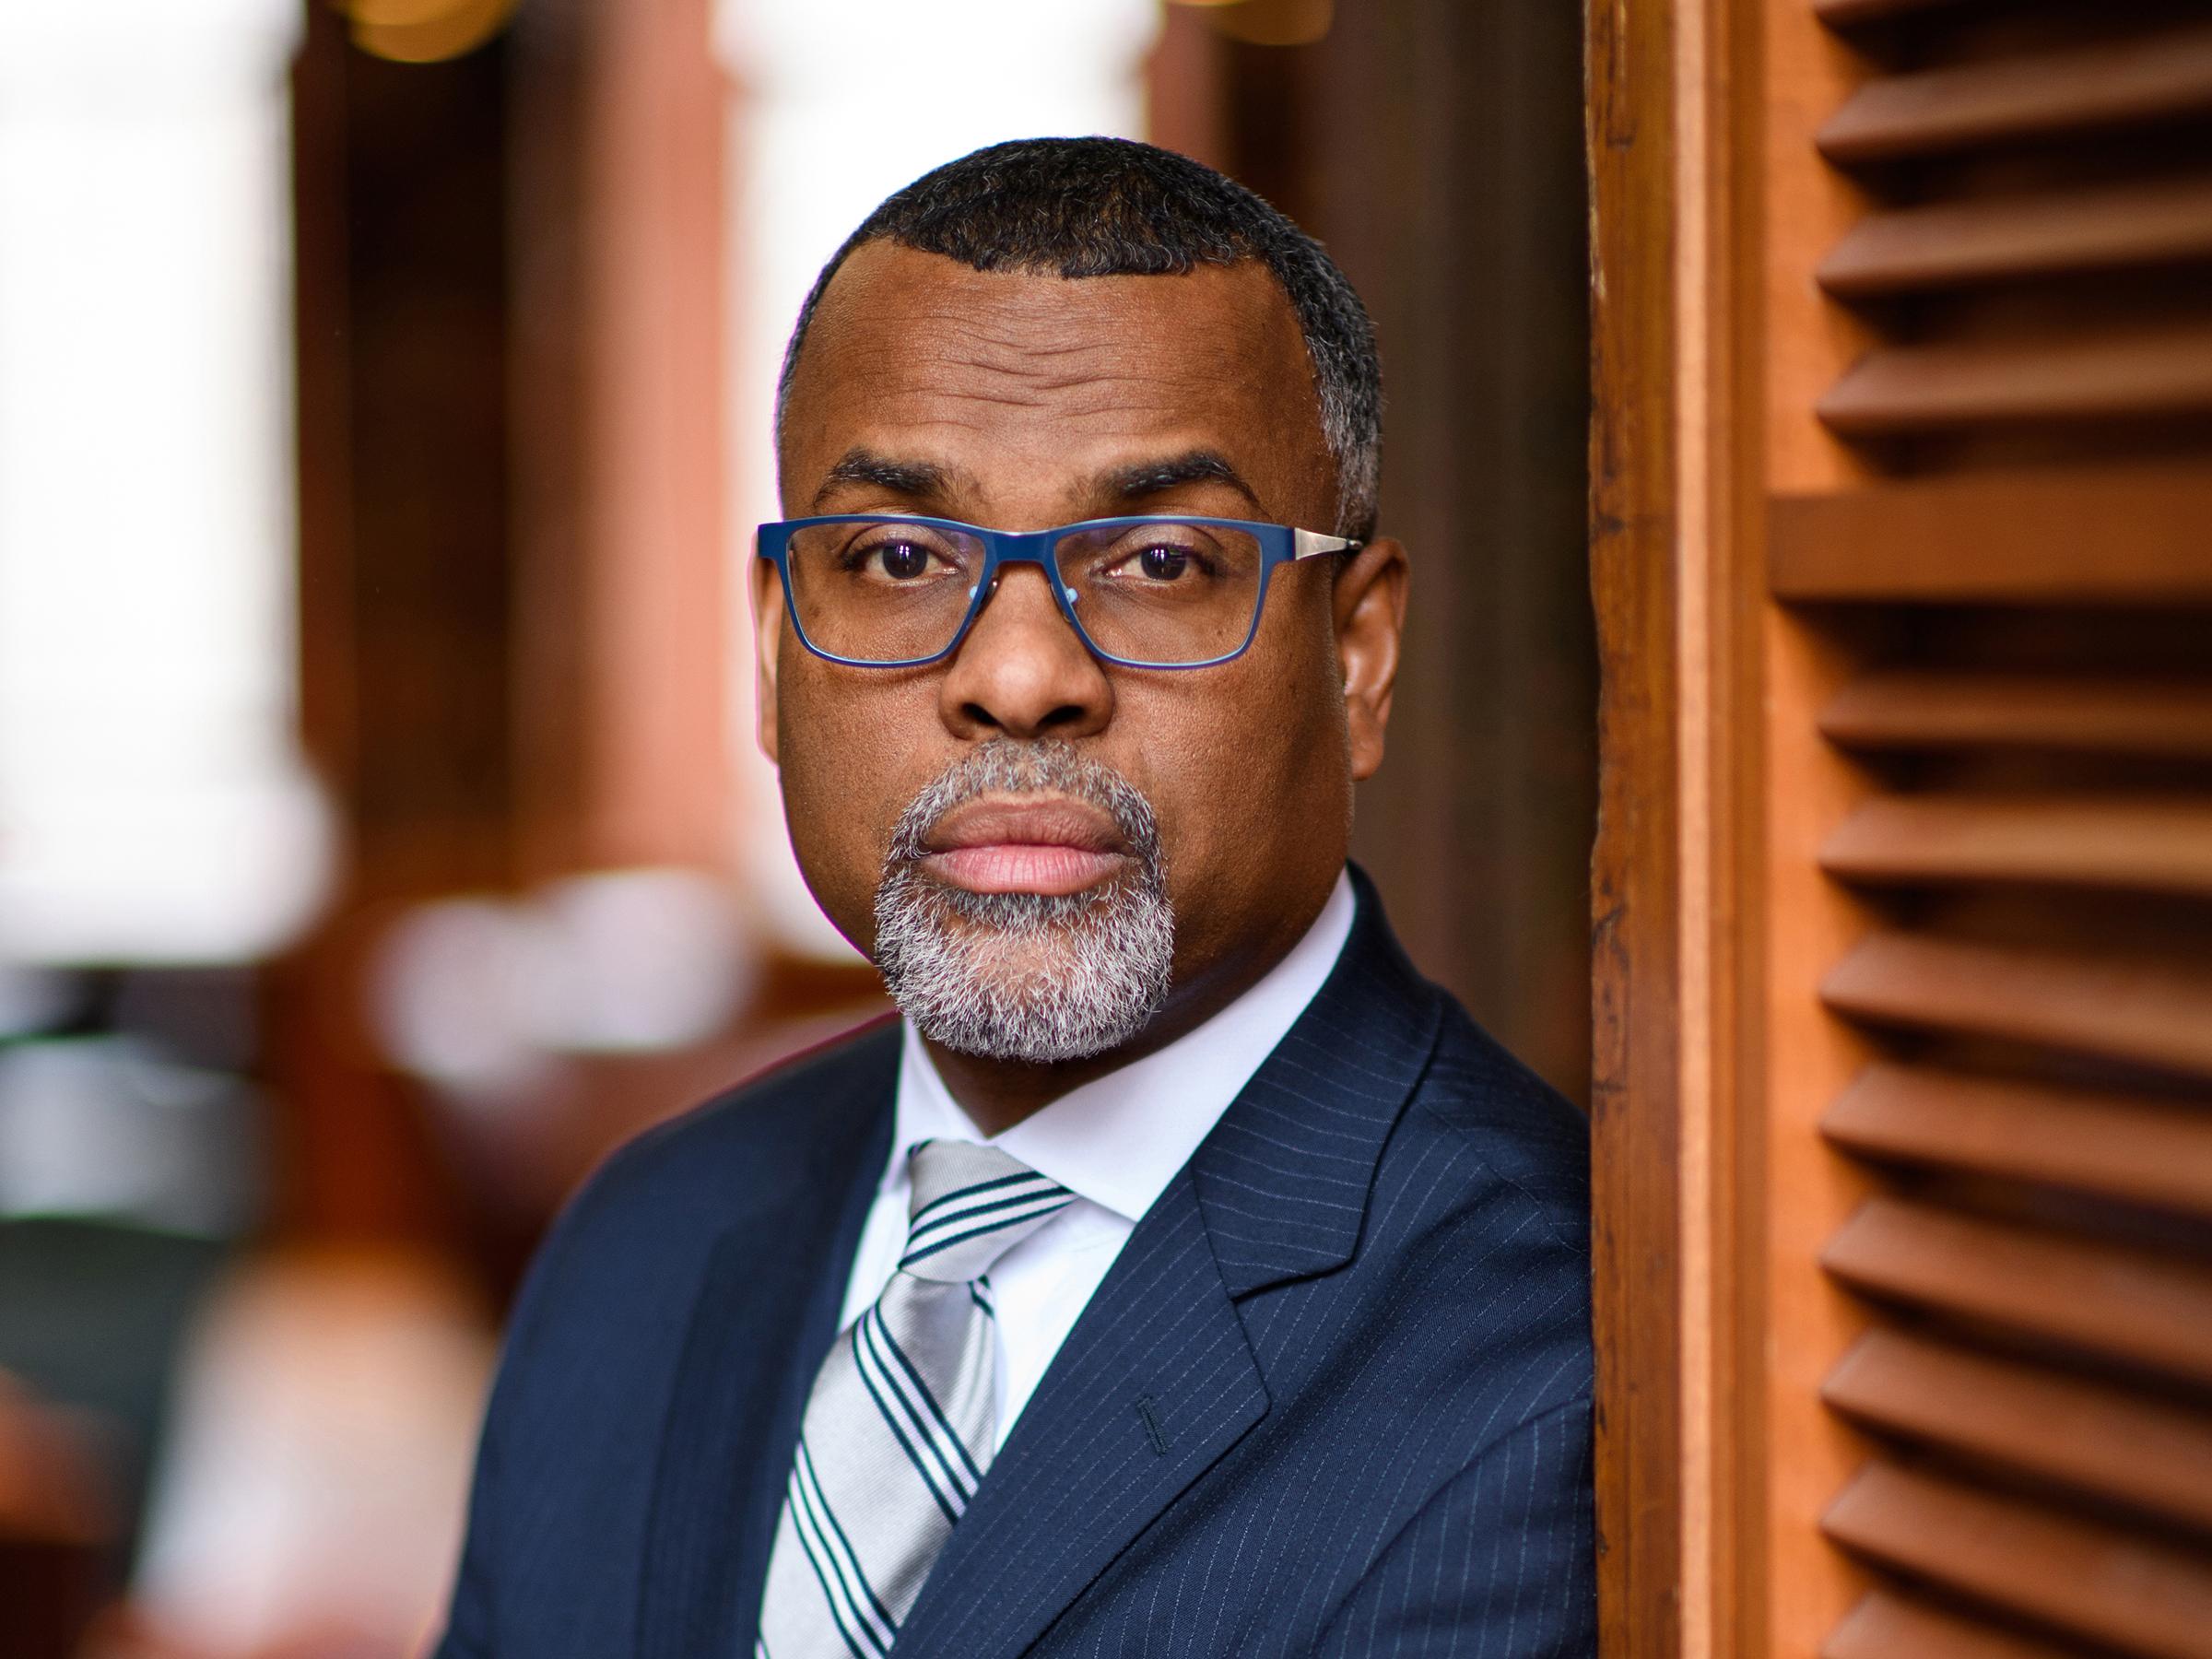 Eddie Glaude Jr., a bestselling author and chair of the African American studies department at Princeton University, will speak to a SUNY Oswego audience at 6:30 pm Nov. 4 in Marano Campus Center auditorium, part of I Am Oz Diversity Speaker Series